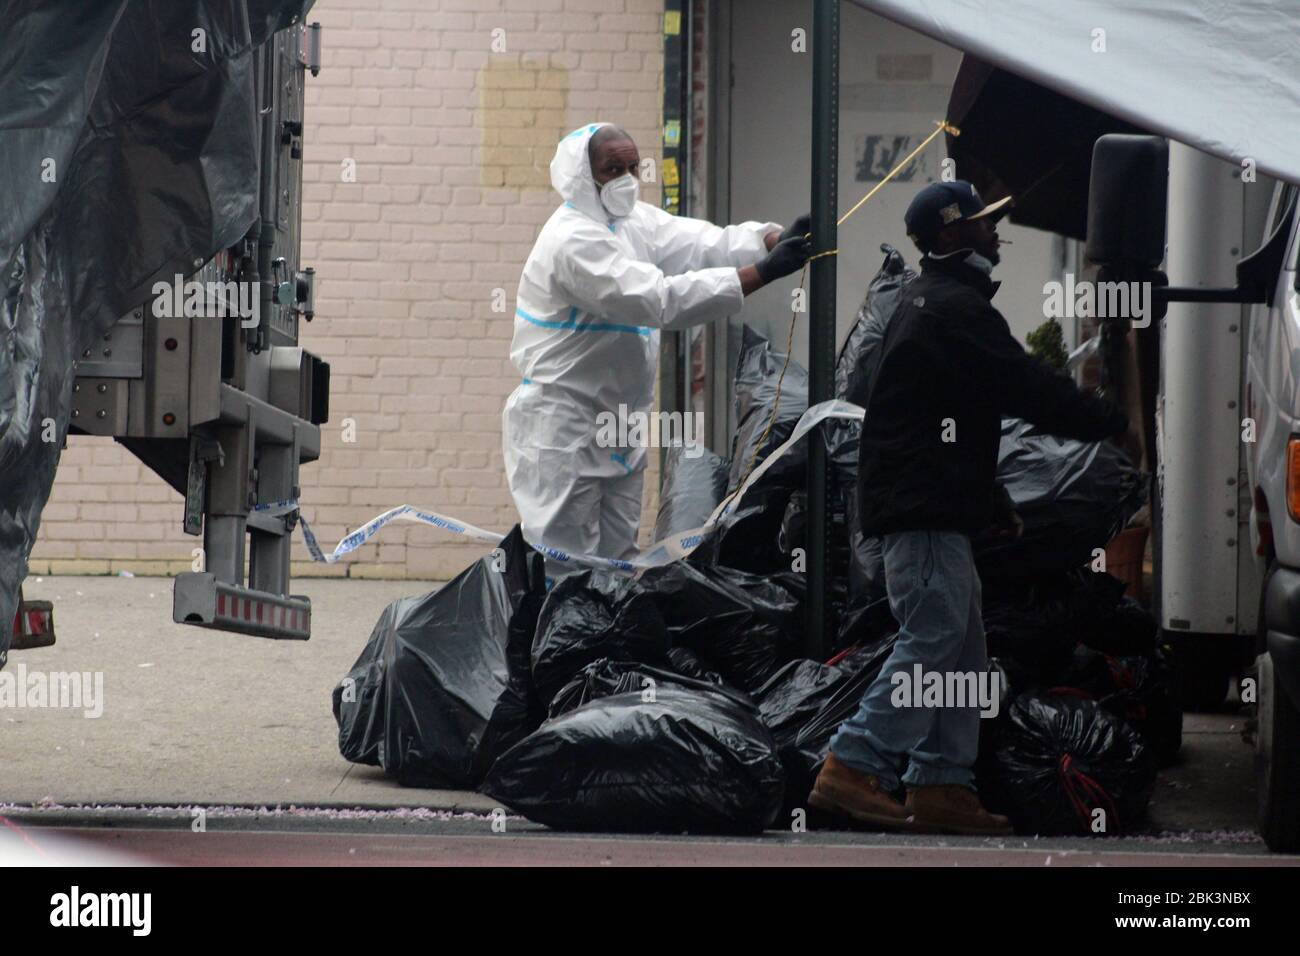 April 30, 2020, New York, New York, USA: This man, dressed in a hazmat, pulls a cord in the middle of large black trash bags to install tarpaulin at the back of a refrigerated truck next to the Andrew T. Cleckley Funeral Home in Brooklyn where corpses not properly cared have been removed. 60 bodies were stored in 4 non-refregerated vehiciles lining the street nearby stores. Neighbors reported a foul smell still persistent and fluids dripping from the trucks. The funeral home was overwhelmed by COVID-19 deaths, waiting for weeks for cremations in New York. (Credit Image: © Marie Le Ble/ZUMA Wir Stock Photo